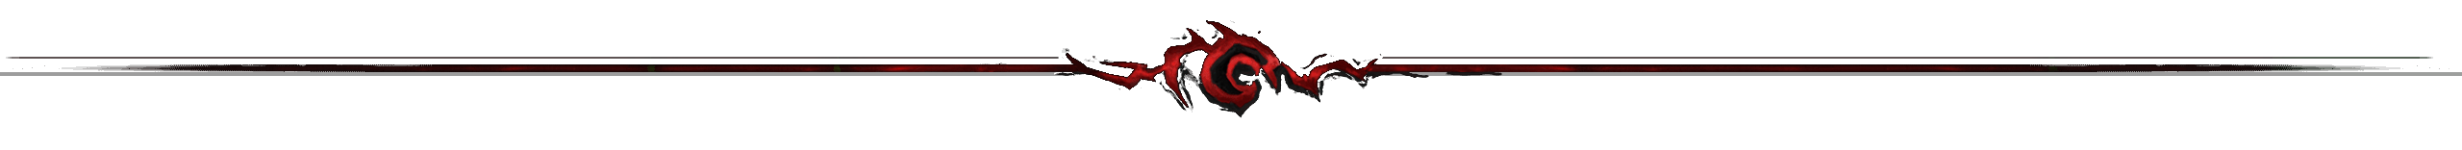 wow-legion-logo-png-8.png